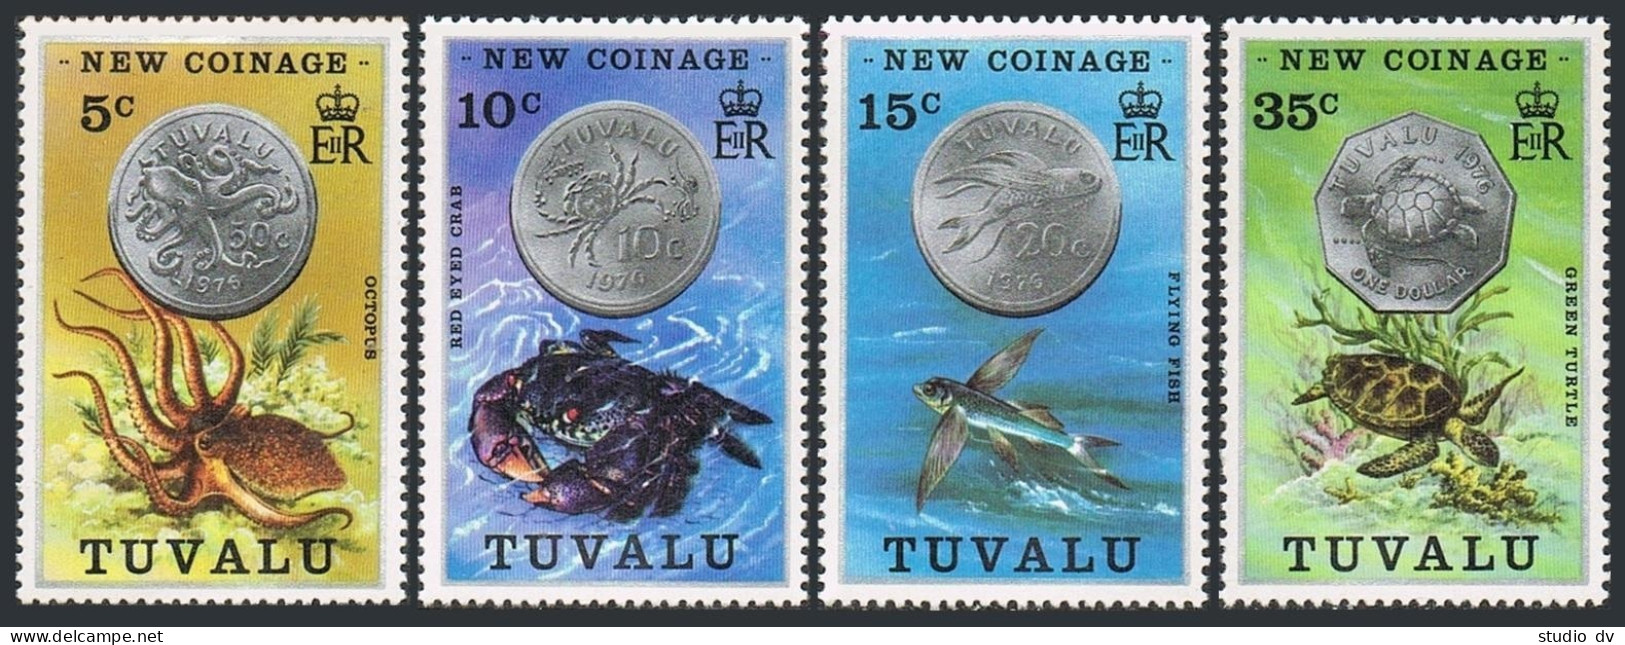 Tuvalu 19-22, MNH. Michel 19-22. New Coinage 1976. Octopus, Crab, Fish, Turtle. - Tuvalu (fr. Elliceinseln)